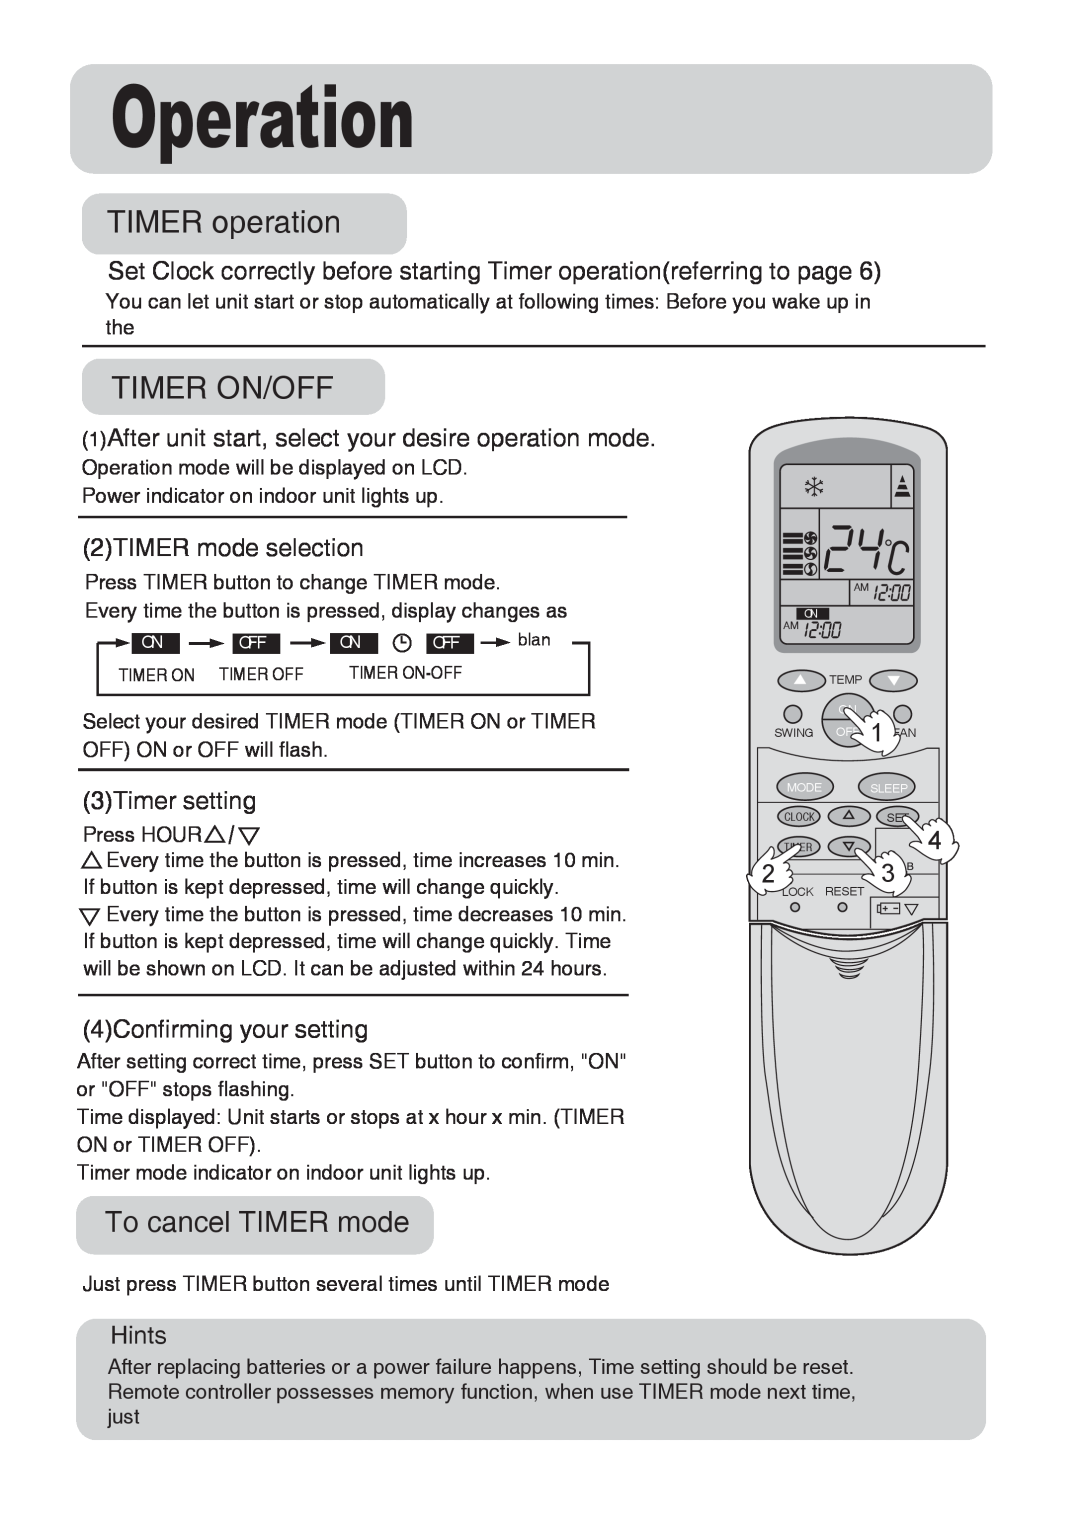 Haier AU072ABBAA TIMER operation, Timer On/Off, To cancel TIMER mode, Operation, 2TIMER mode selection, 3Timer setting 